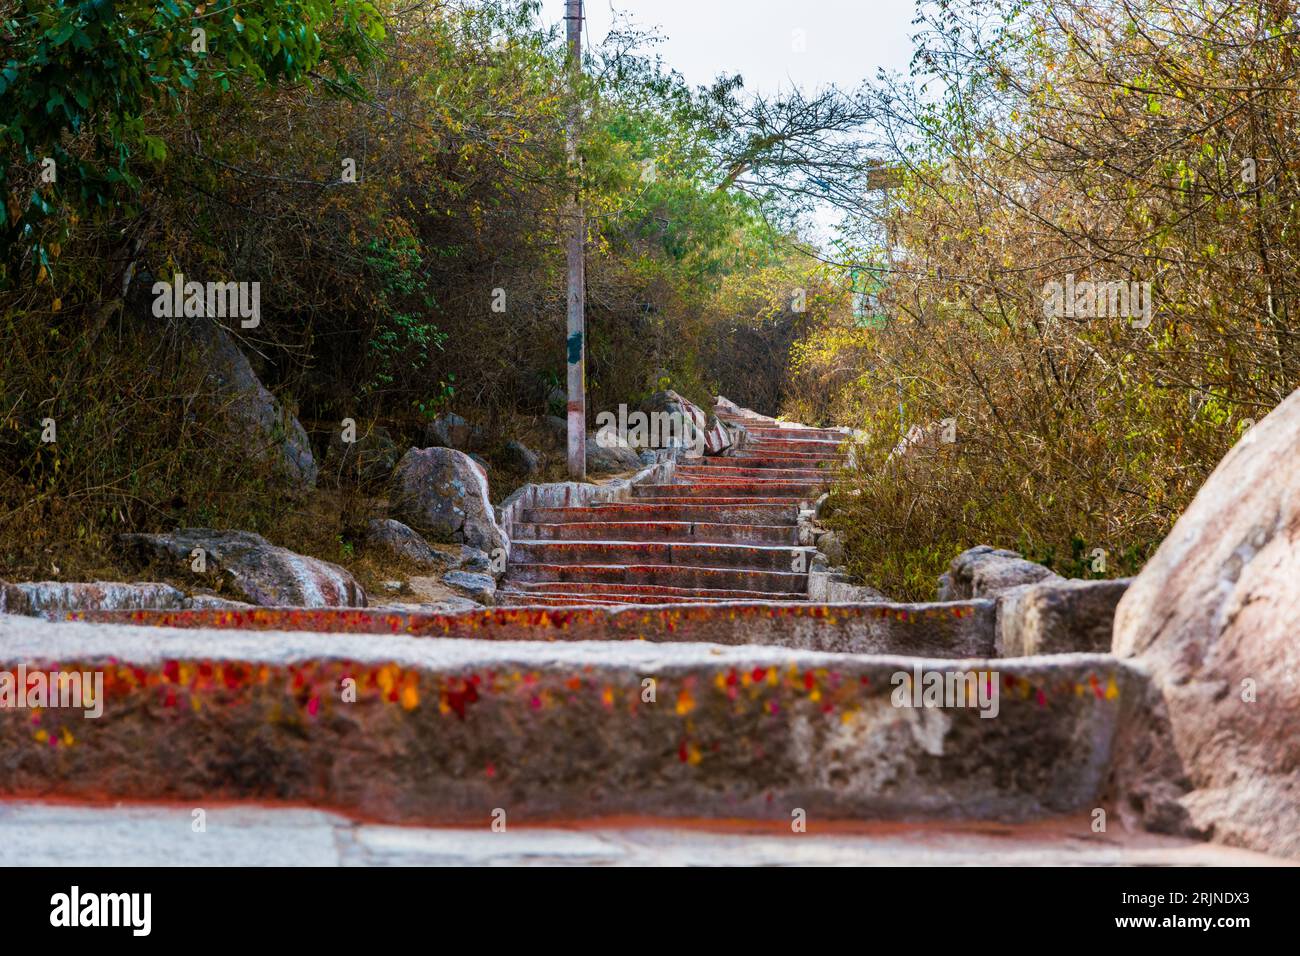 A low-angle shot of The ancient stone stairway of the Chamundi Hills on a sunny day in India Stock Photo